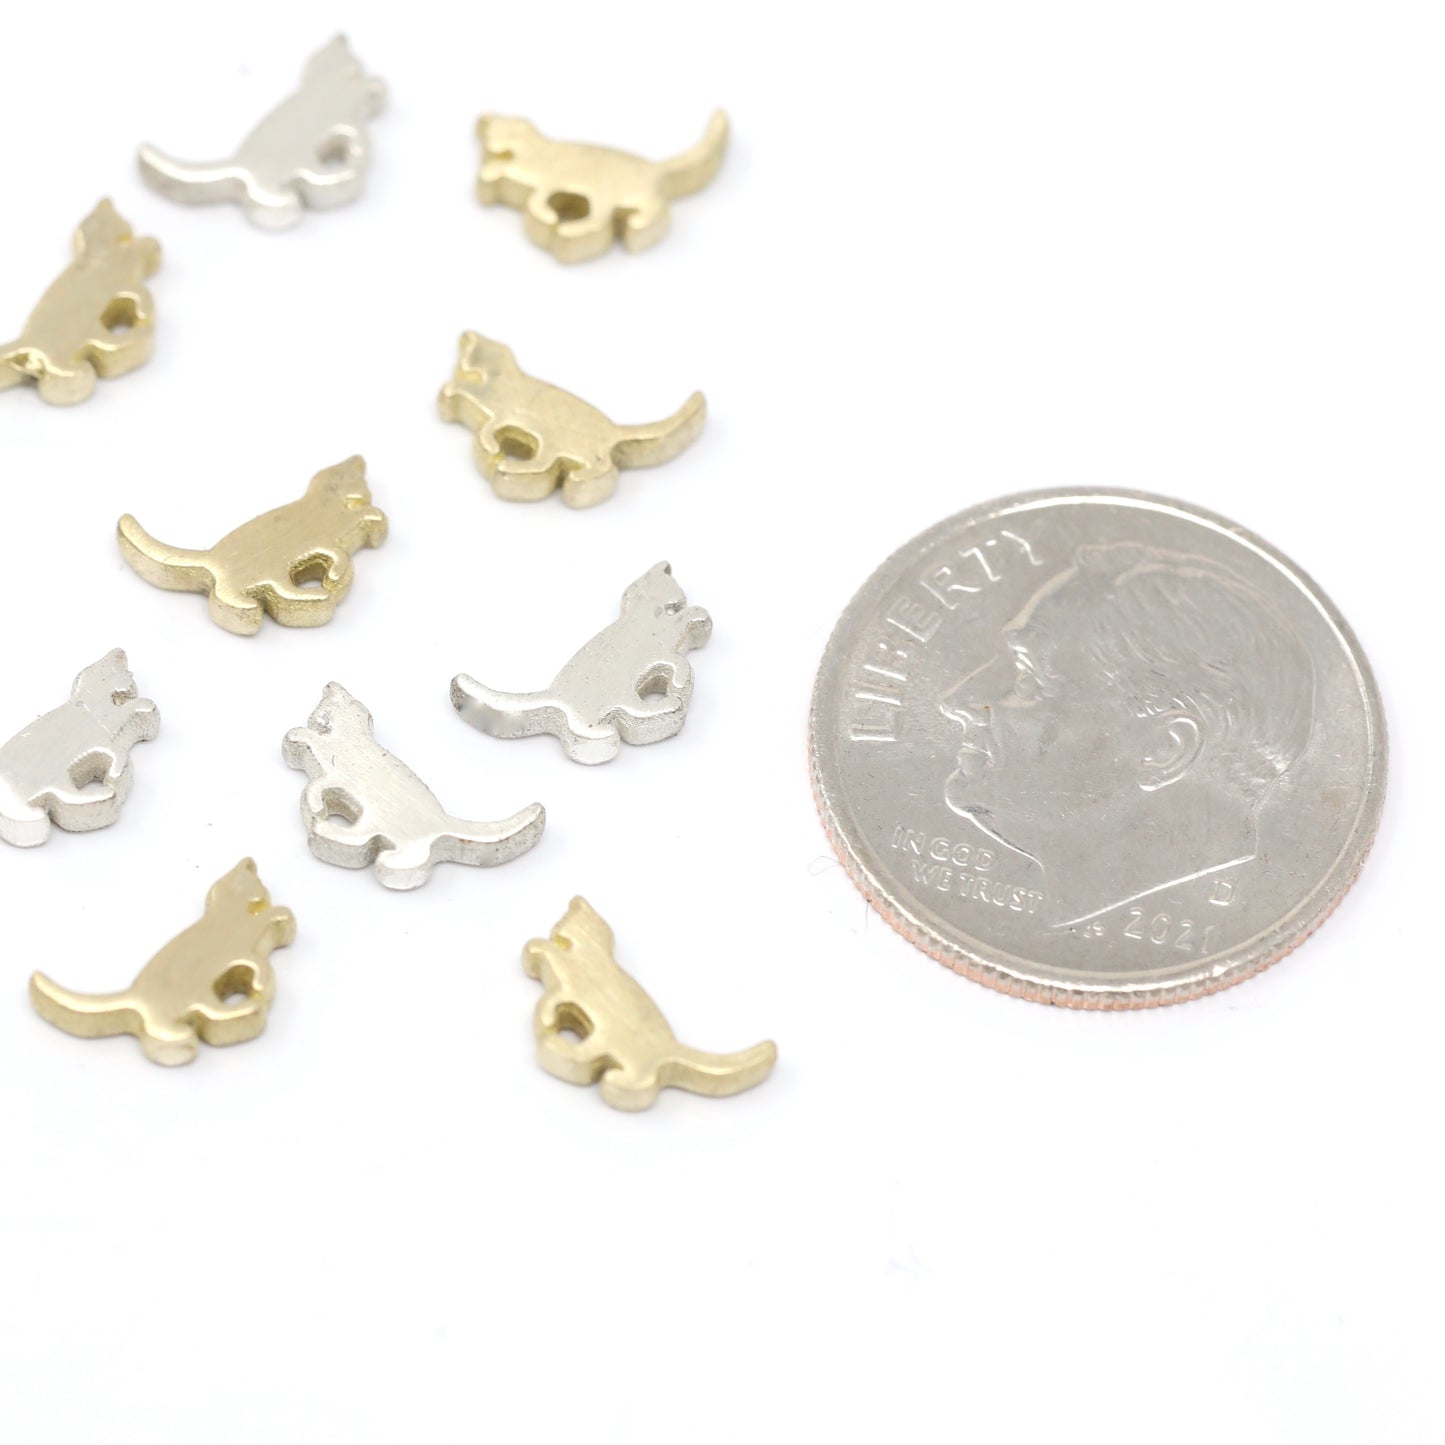 Playing Kitten Accent Charm Embellishments for Soldering or Jewelry Making